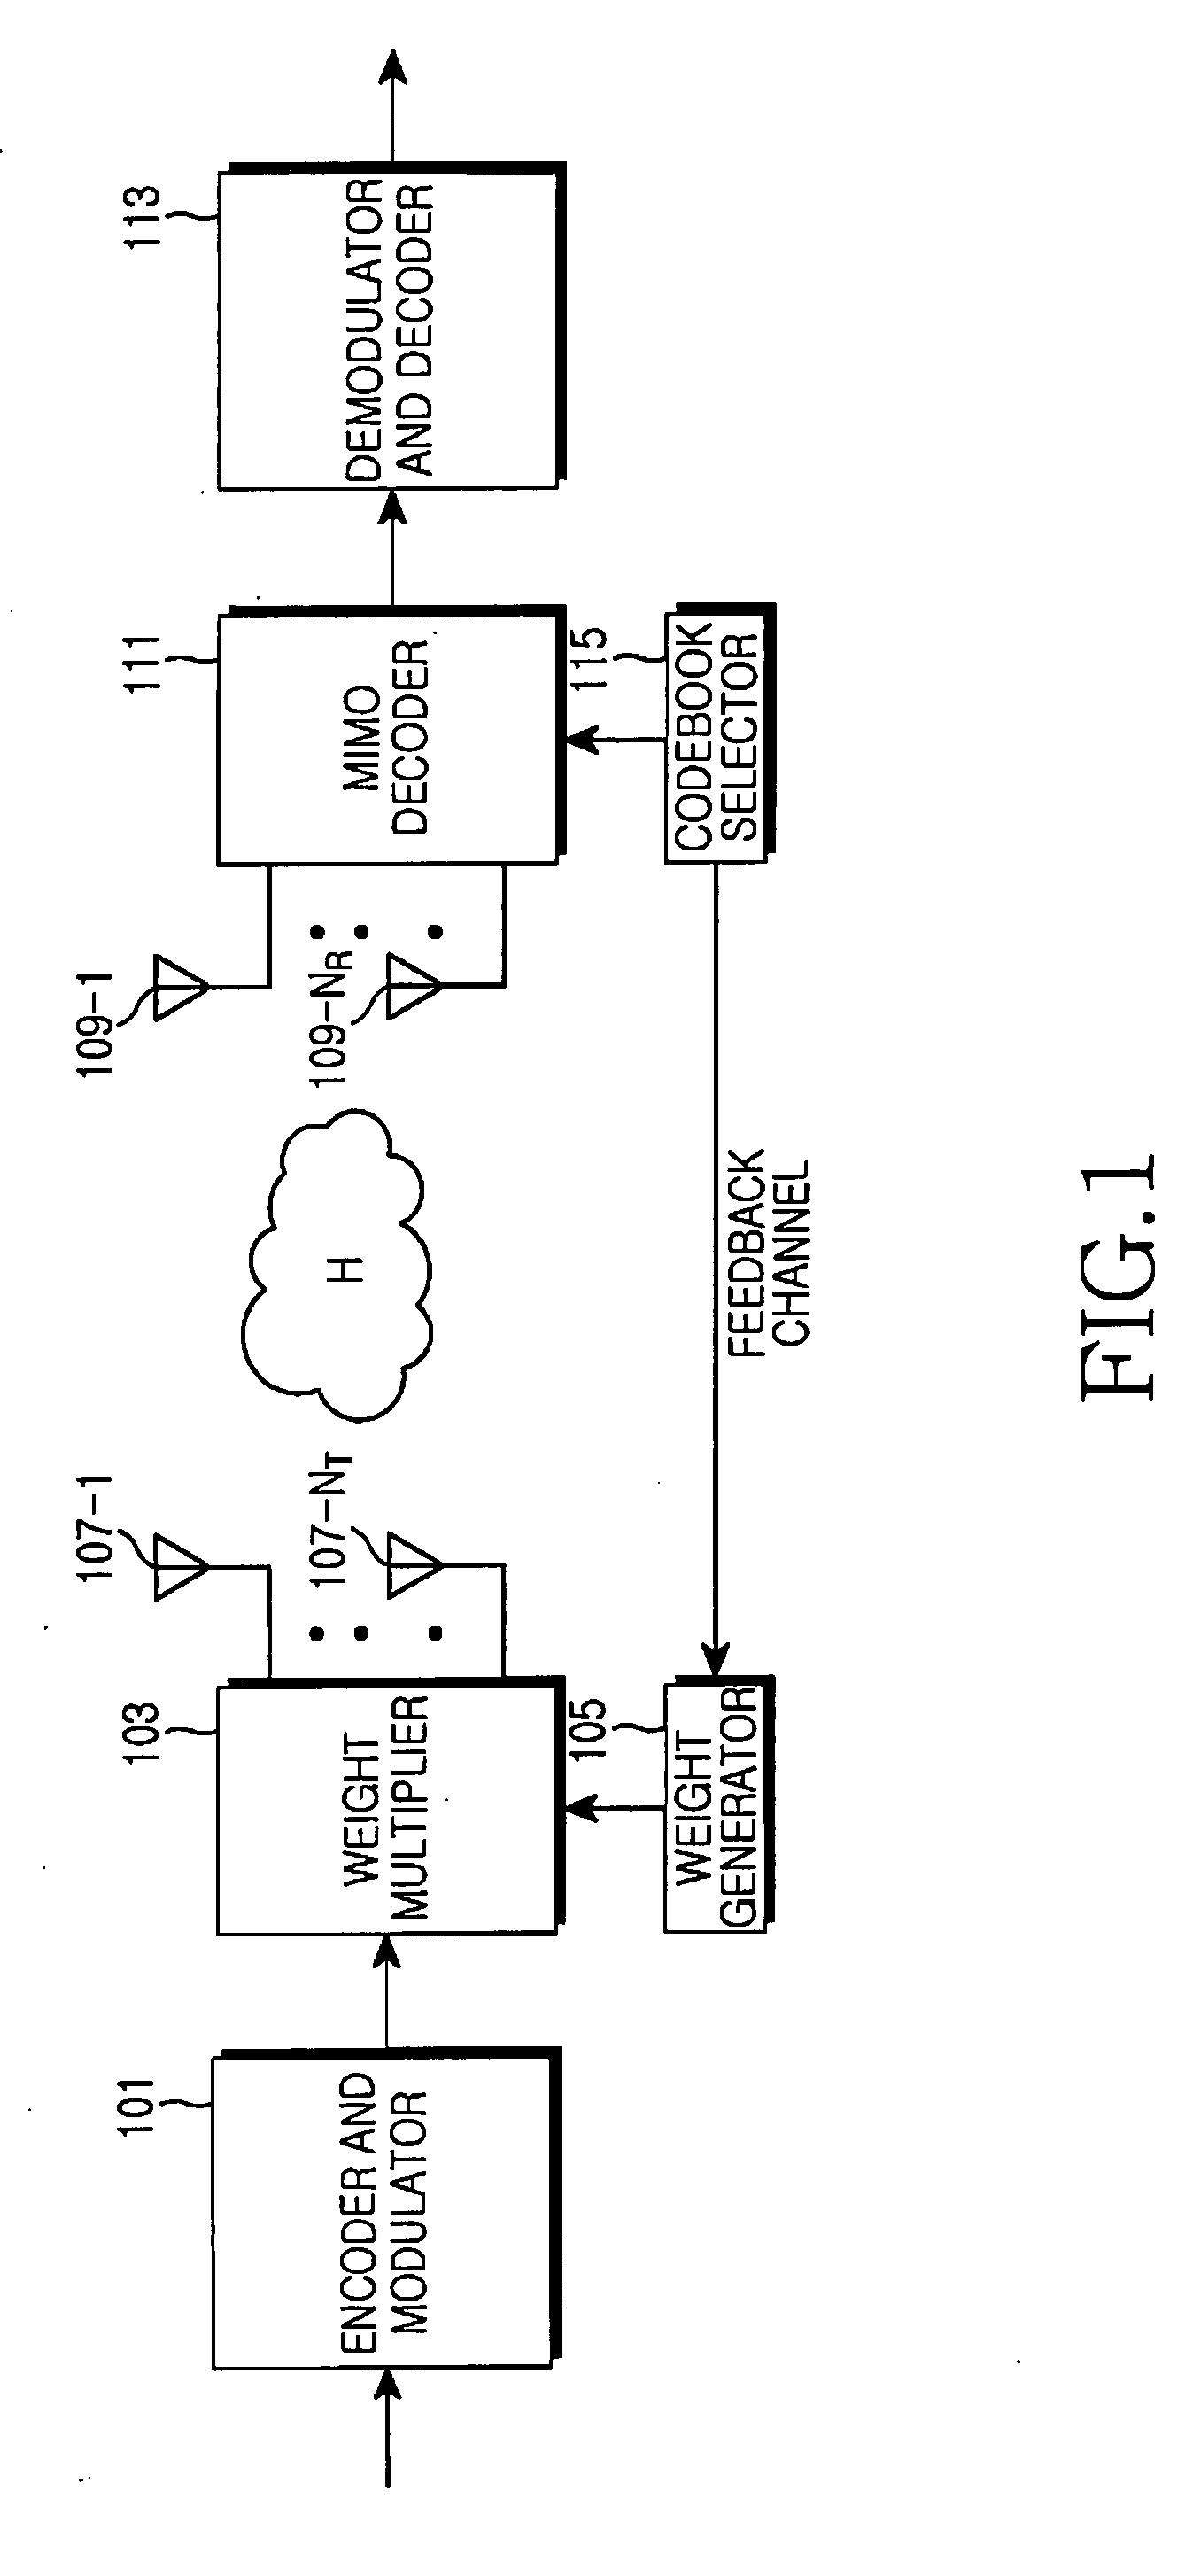 Apparatus and method for determining beamforming vector in a codebook-based beamforming system